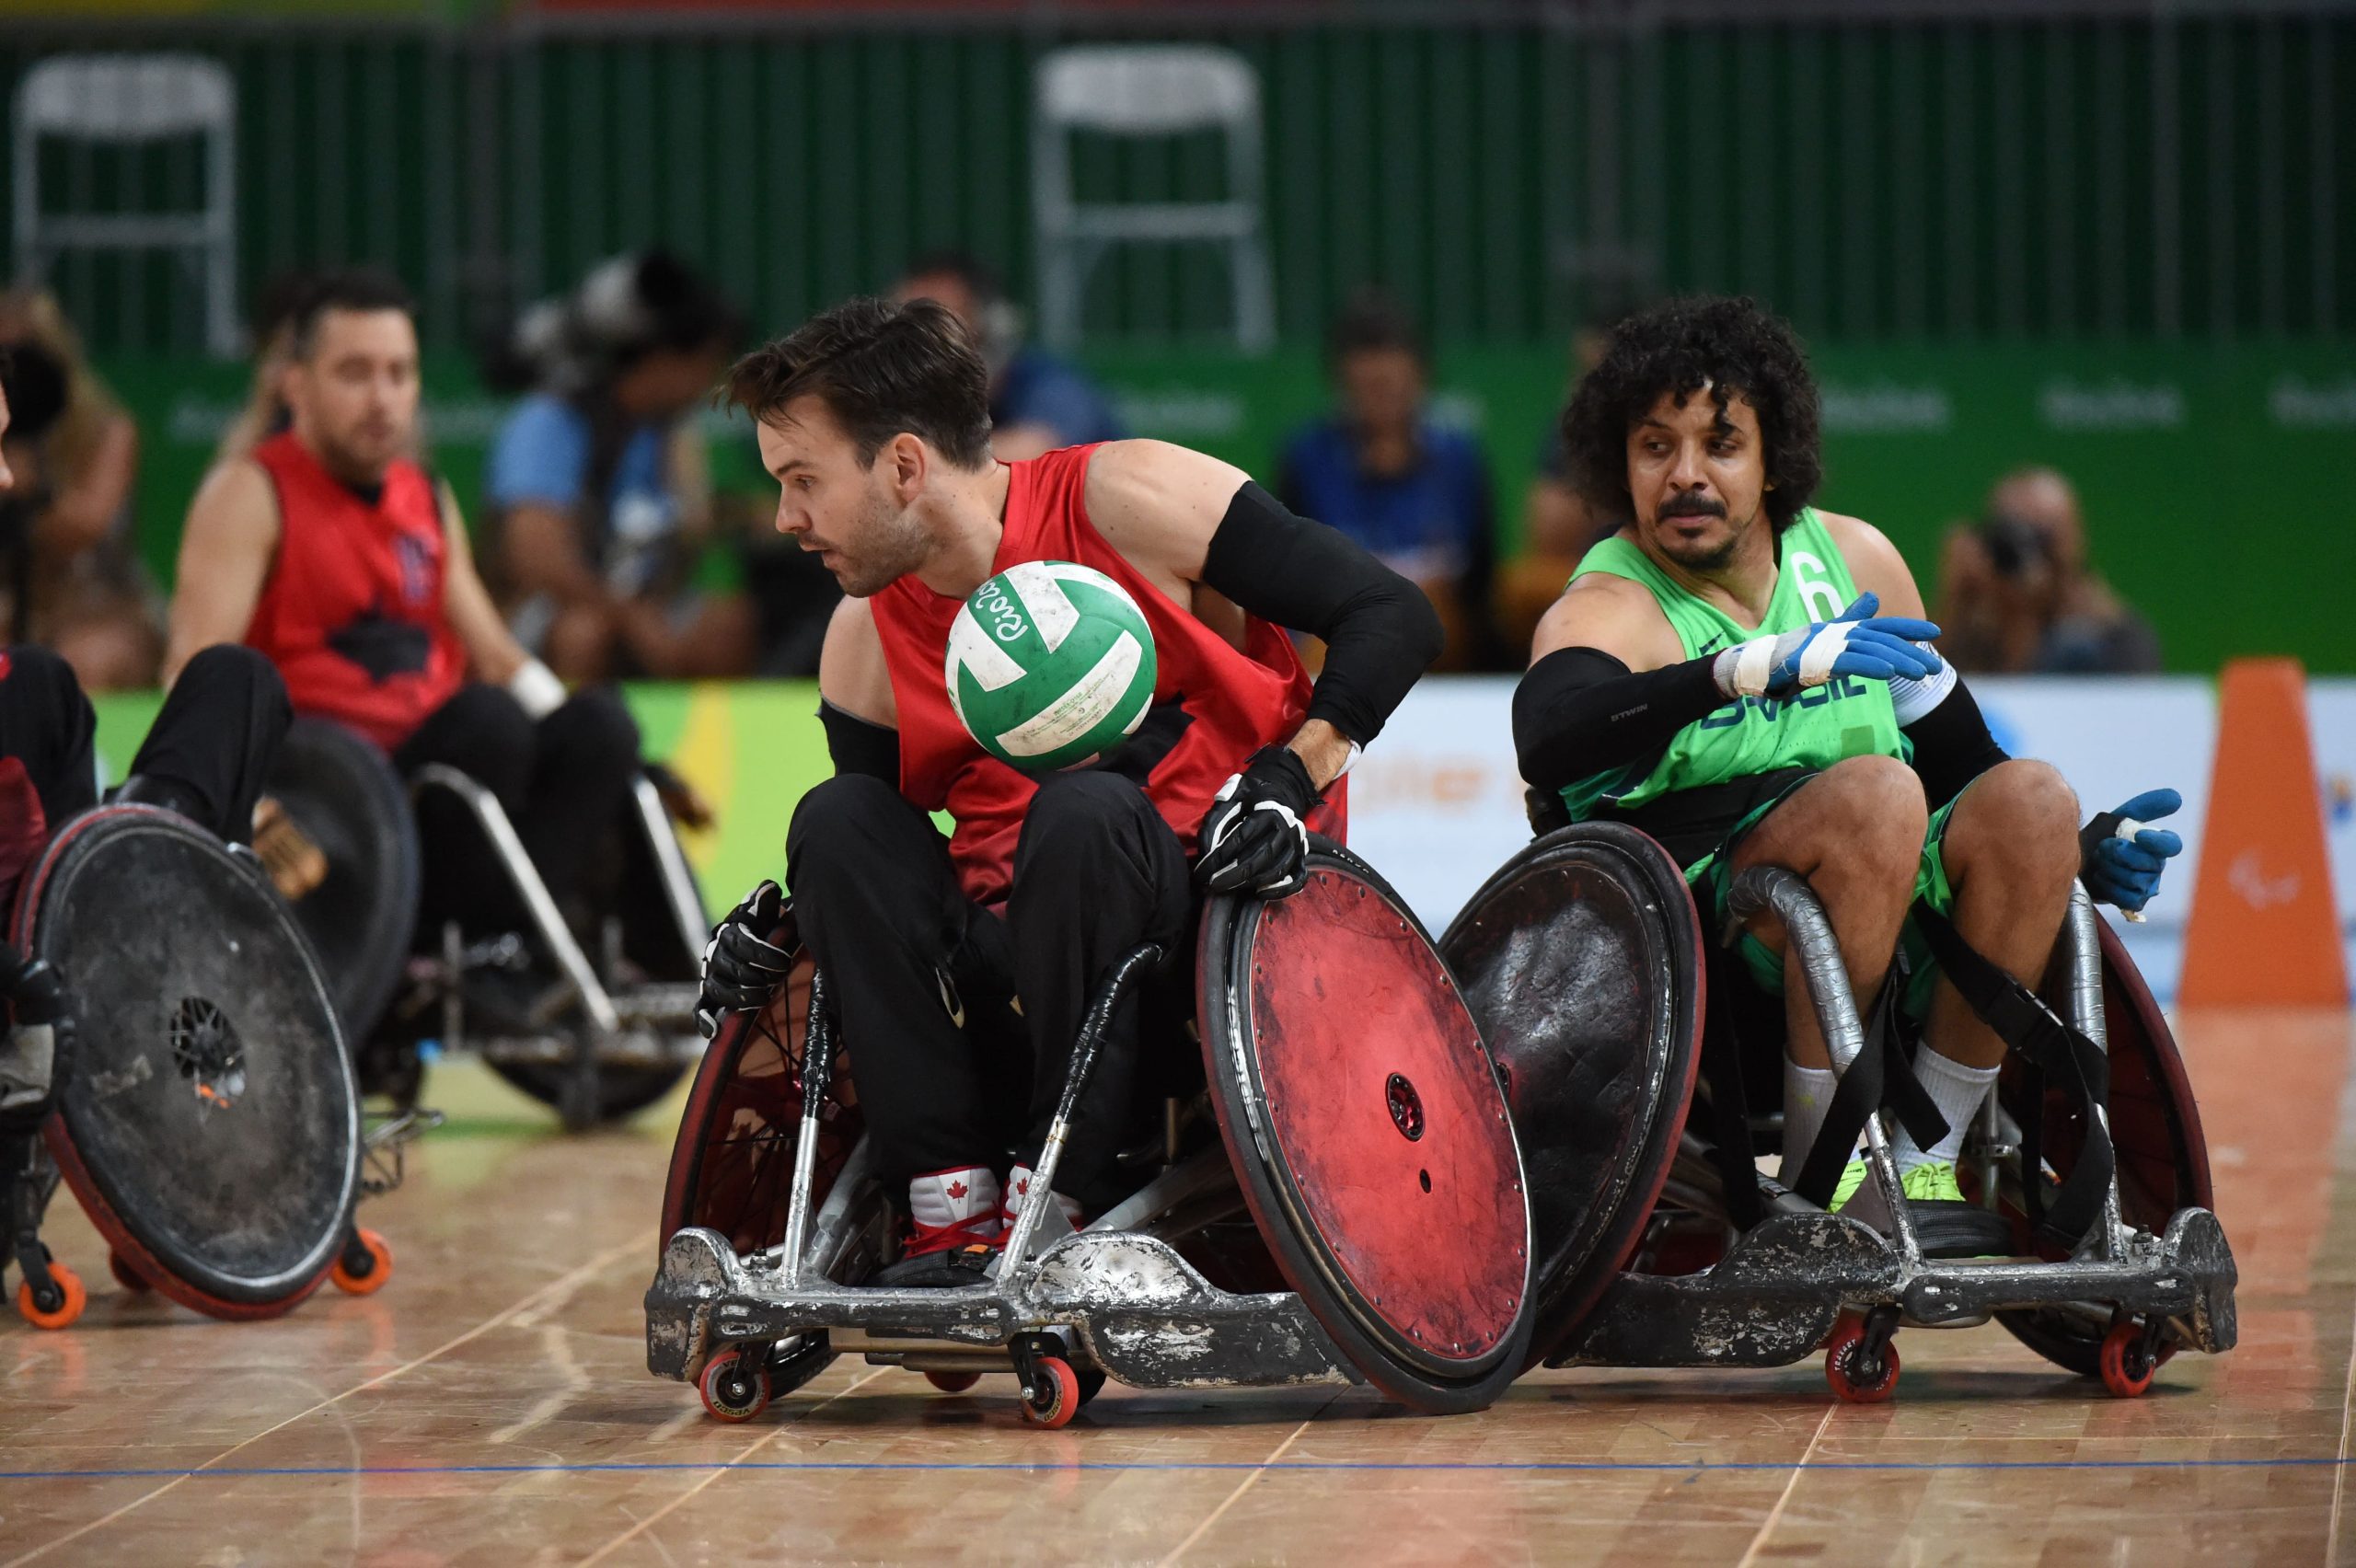 A group of men playing wheelchair rugby. 